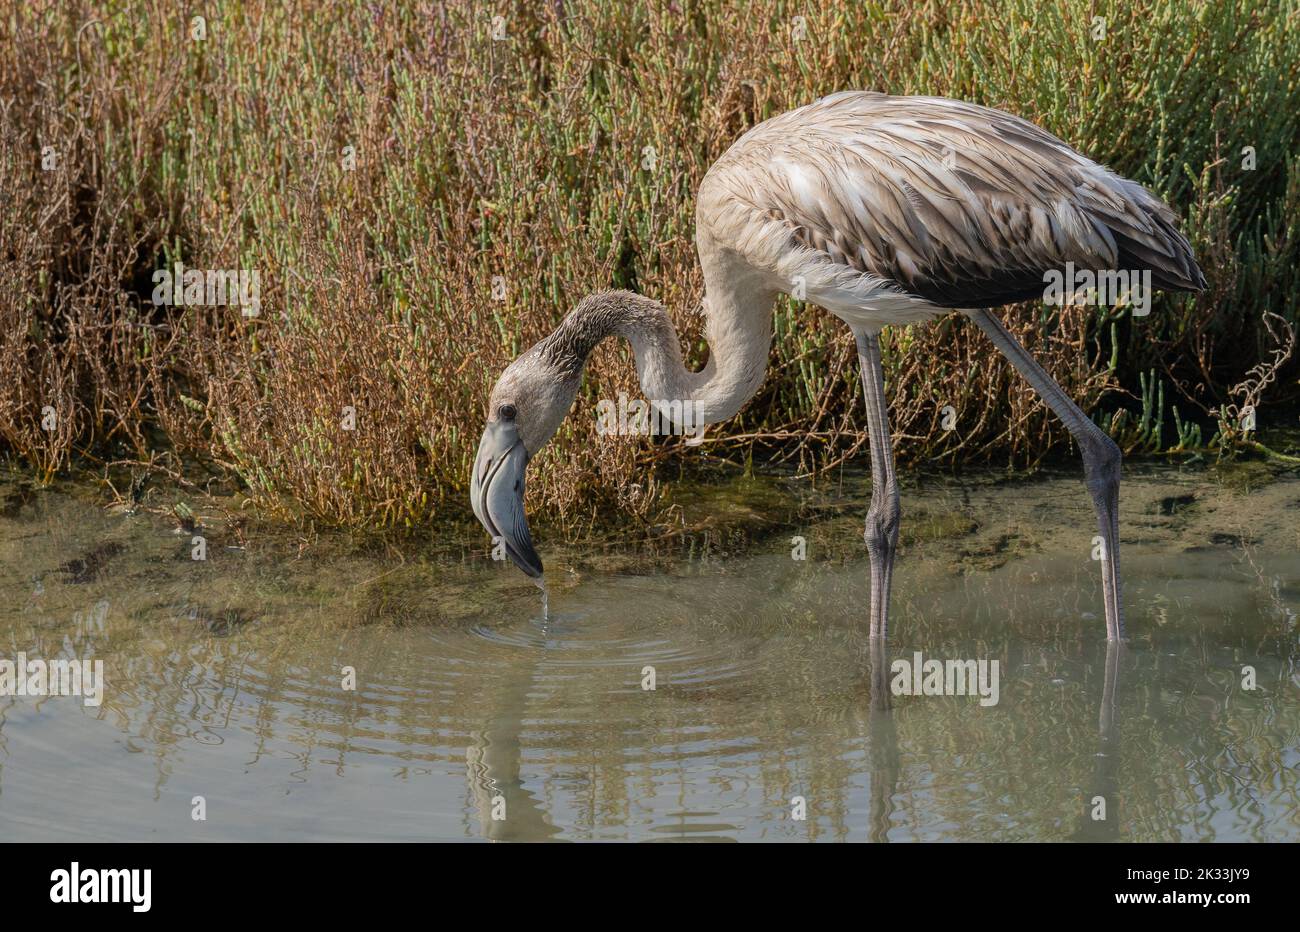 young flamingo in its natural environment Stock Photo